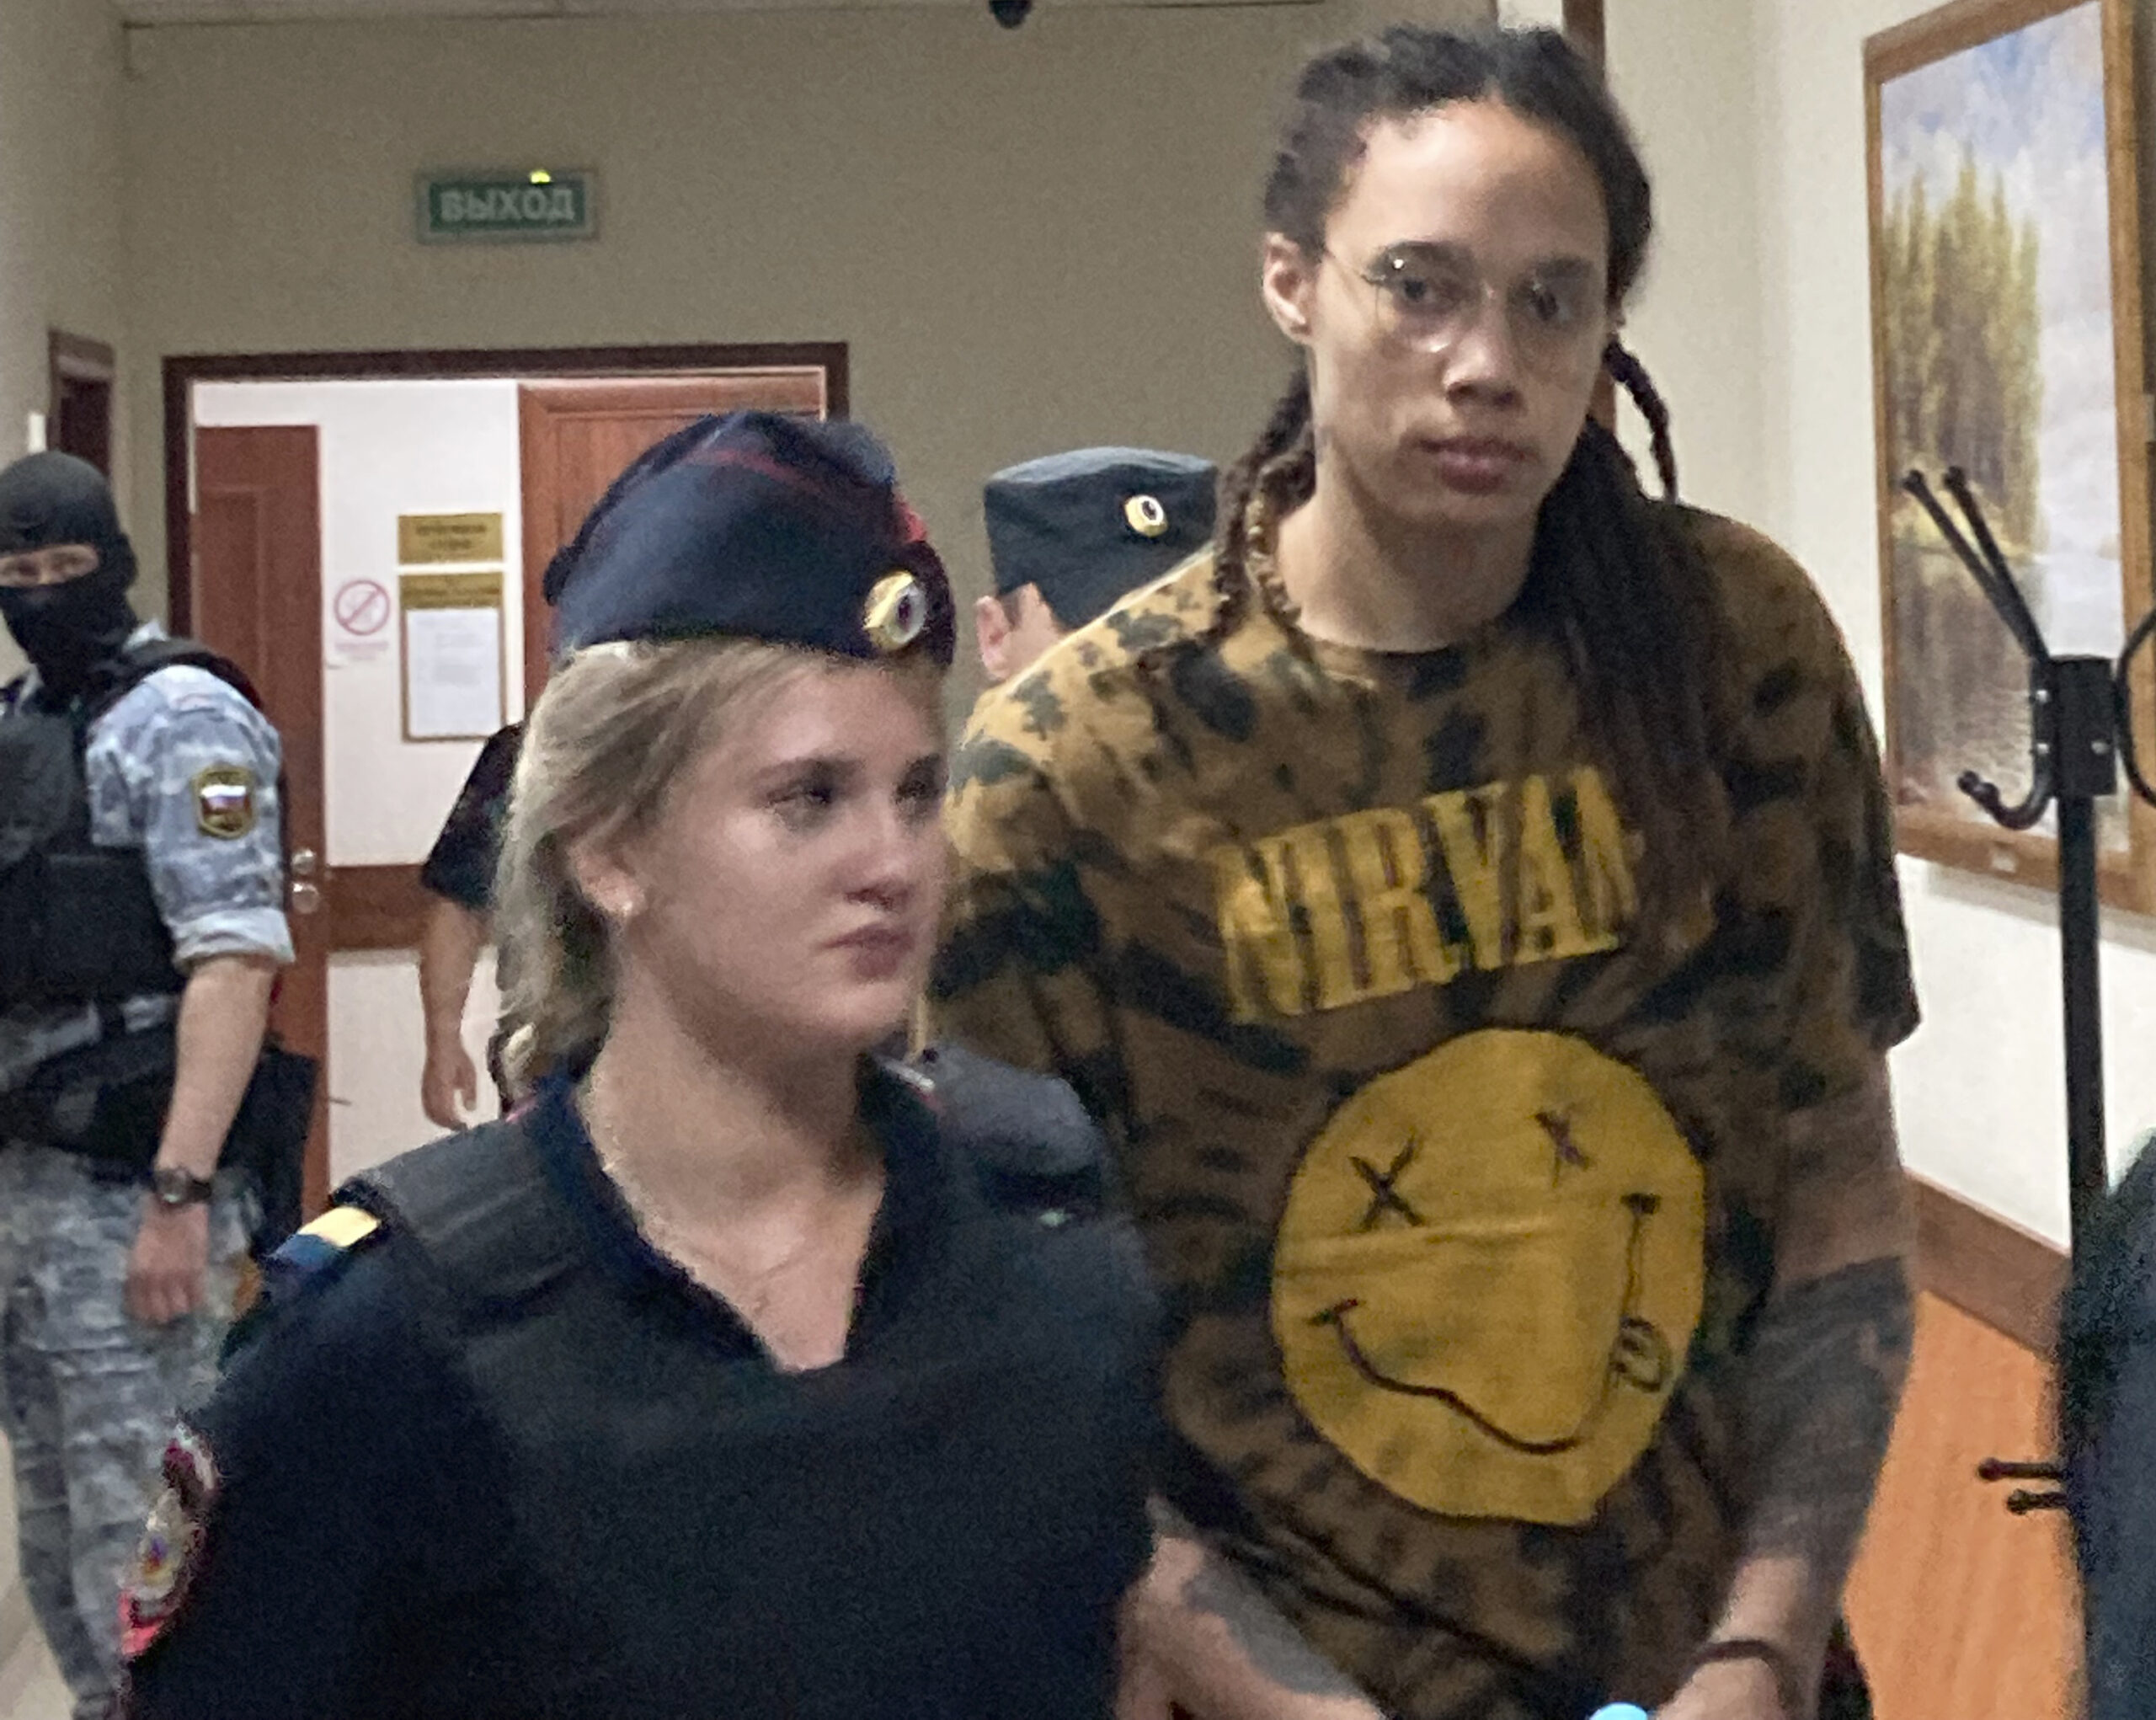 WNBA star and two-time Olympic gold medalist Brittney Griner is escorted to a courtroom for a hearing in the Khimki district court, just outside Moscow, Russia, Friday, July 15, 2022. Griner was arrested in February at the Russian capital's Sheremetyevo Airport when customs officials said they found vape canisters with cannabis oil in her luggage. She has been jailed since then, facing up to 10 years in prison if convicted. (AP Photo/Jim Heintz)